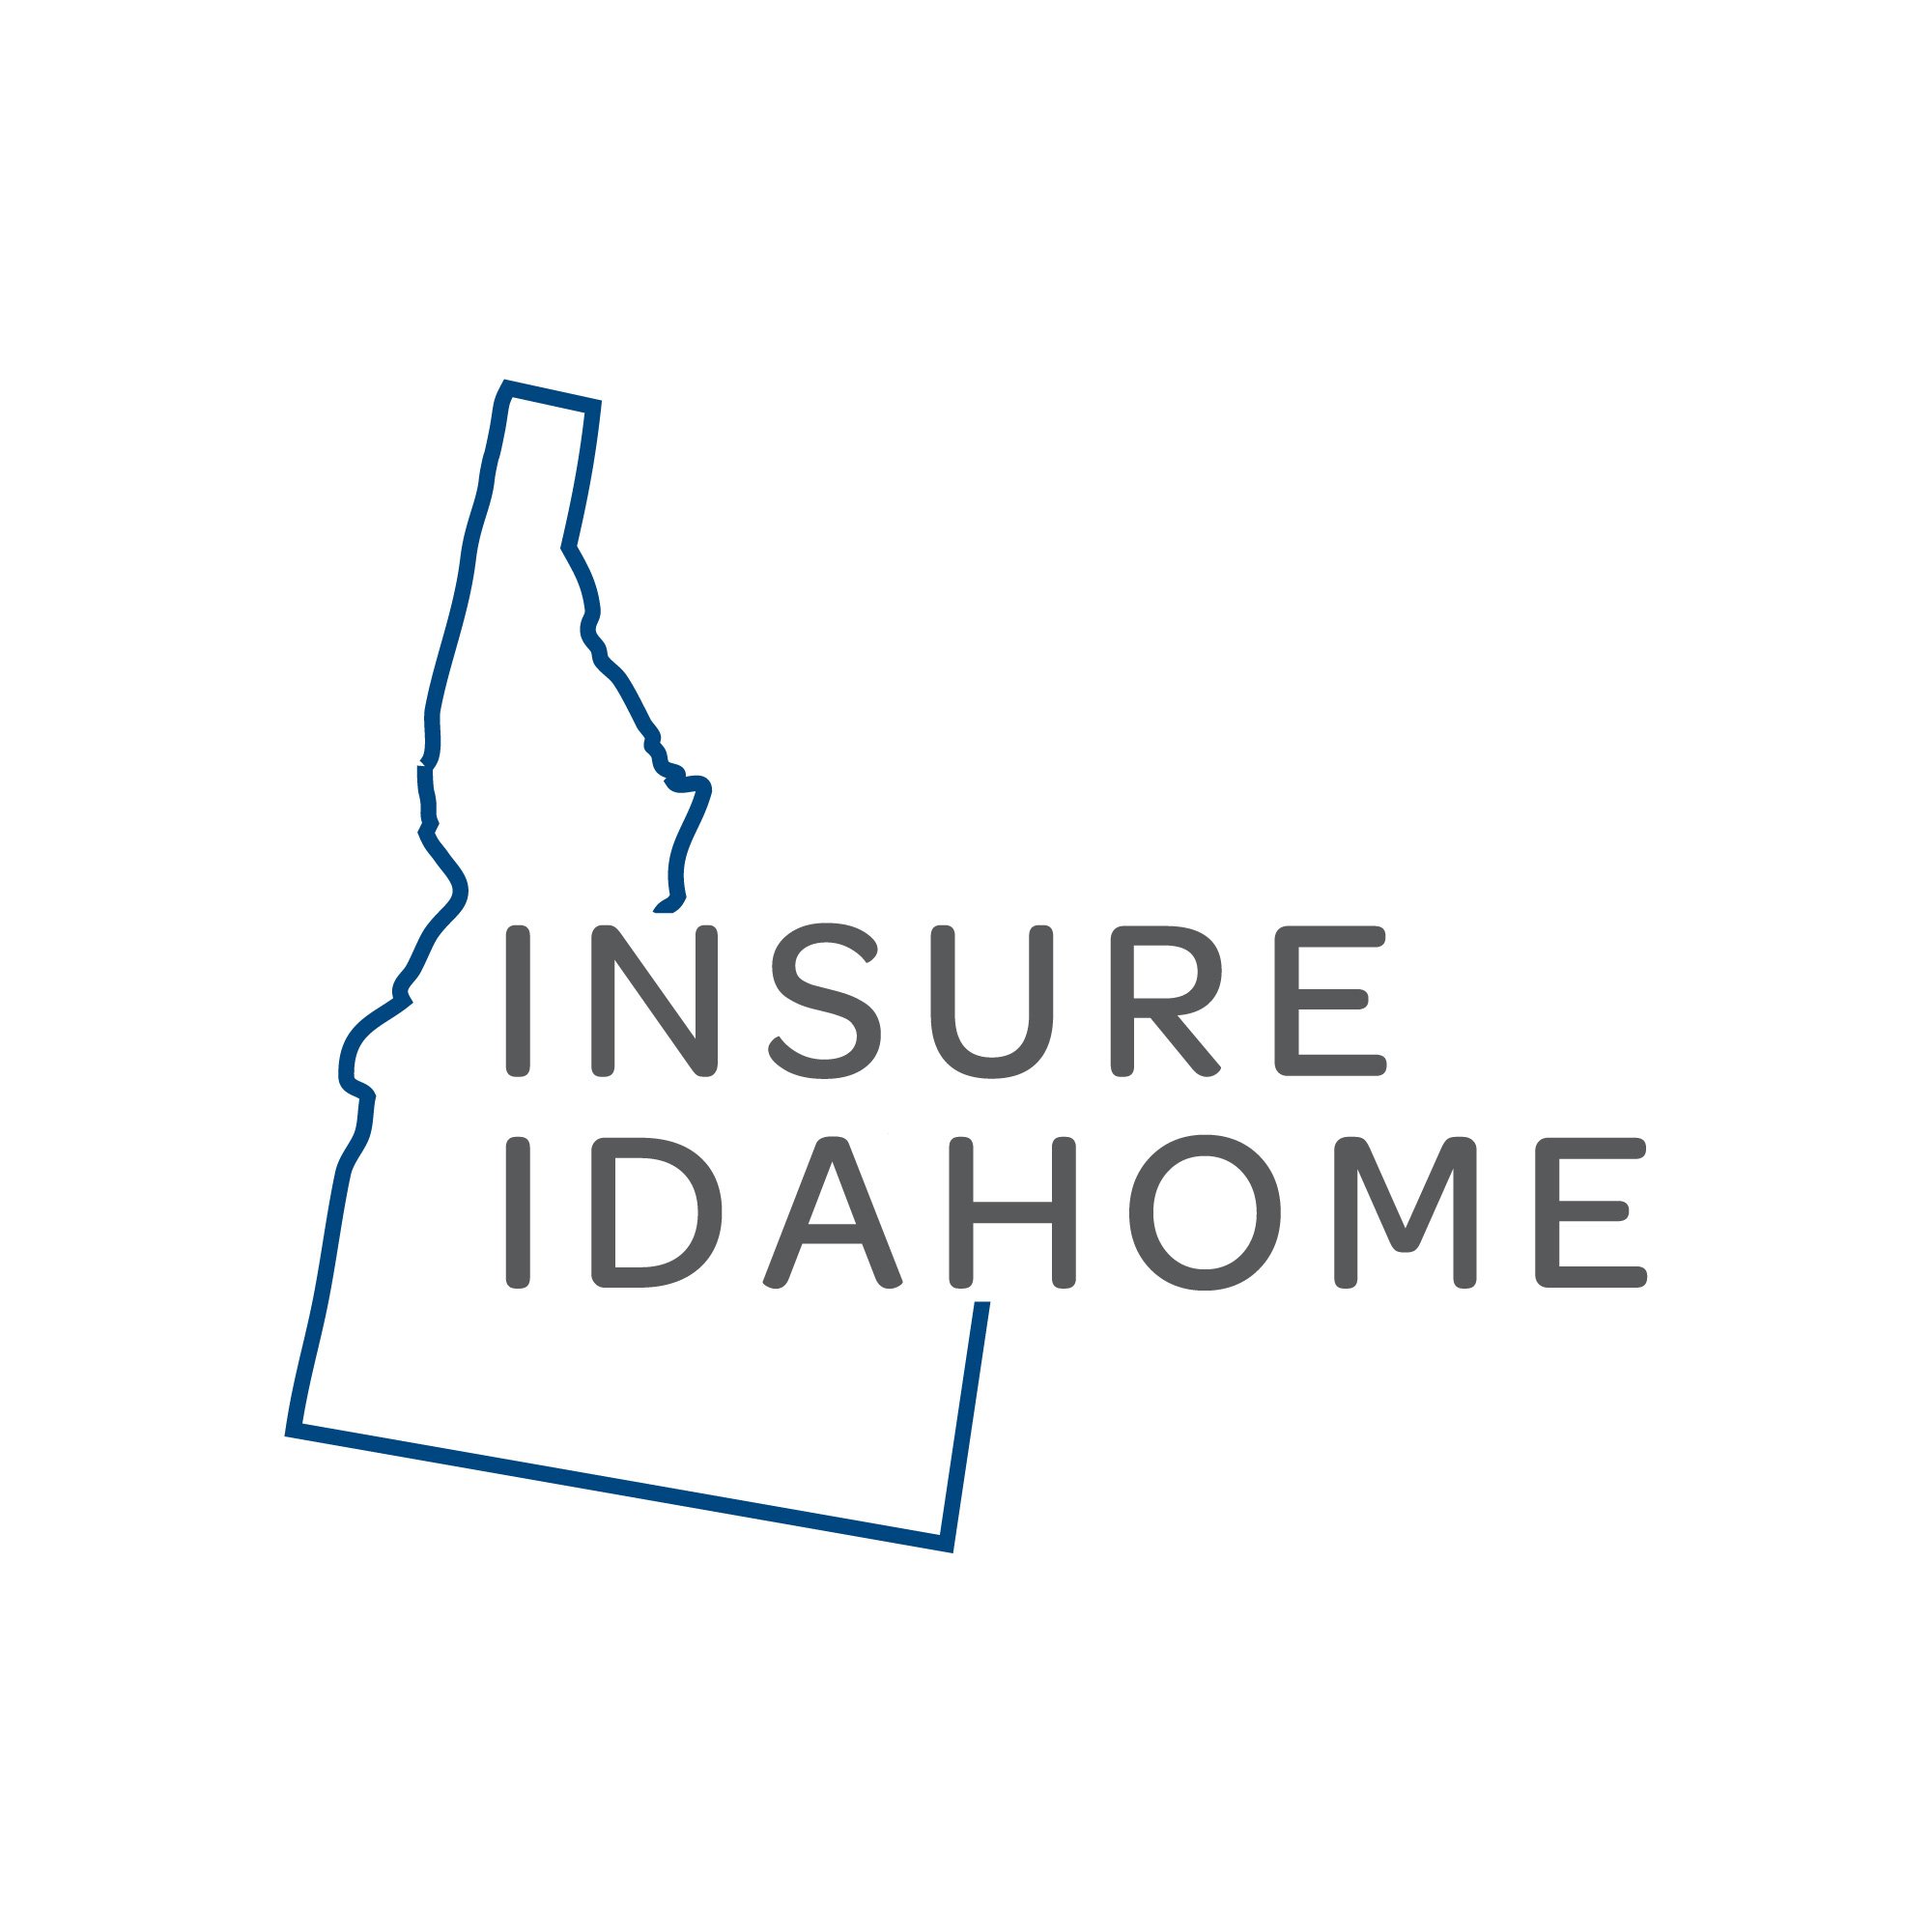 Let us protect your Idahome lifestyle. We specialize in Life, Homeowners, Auto, Mortgage and Commercial Insurance.